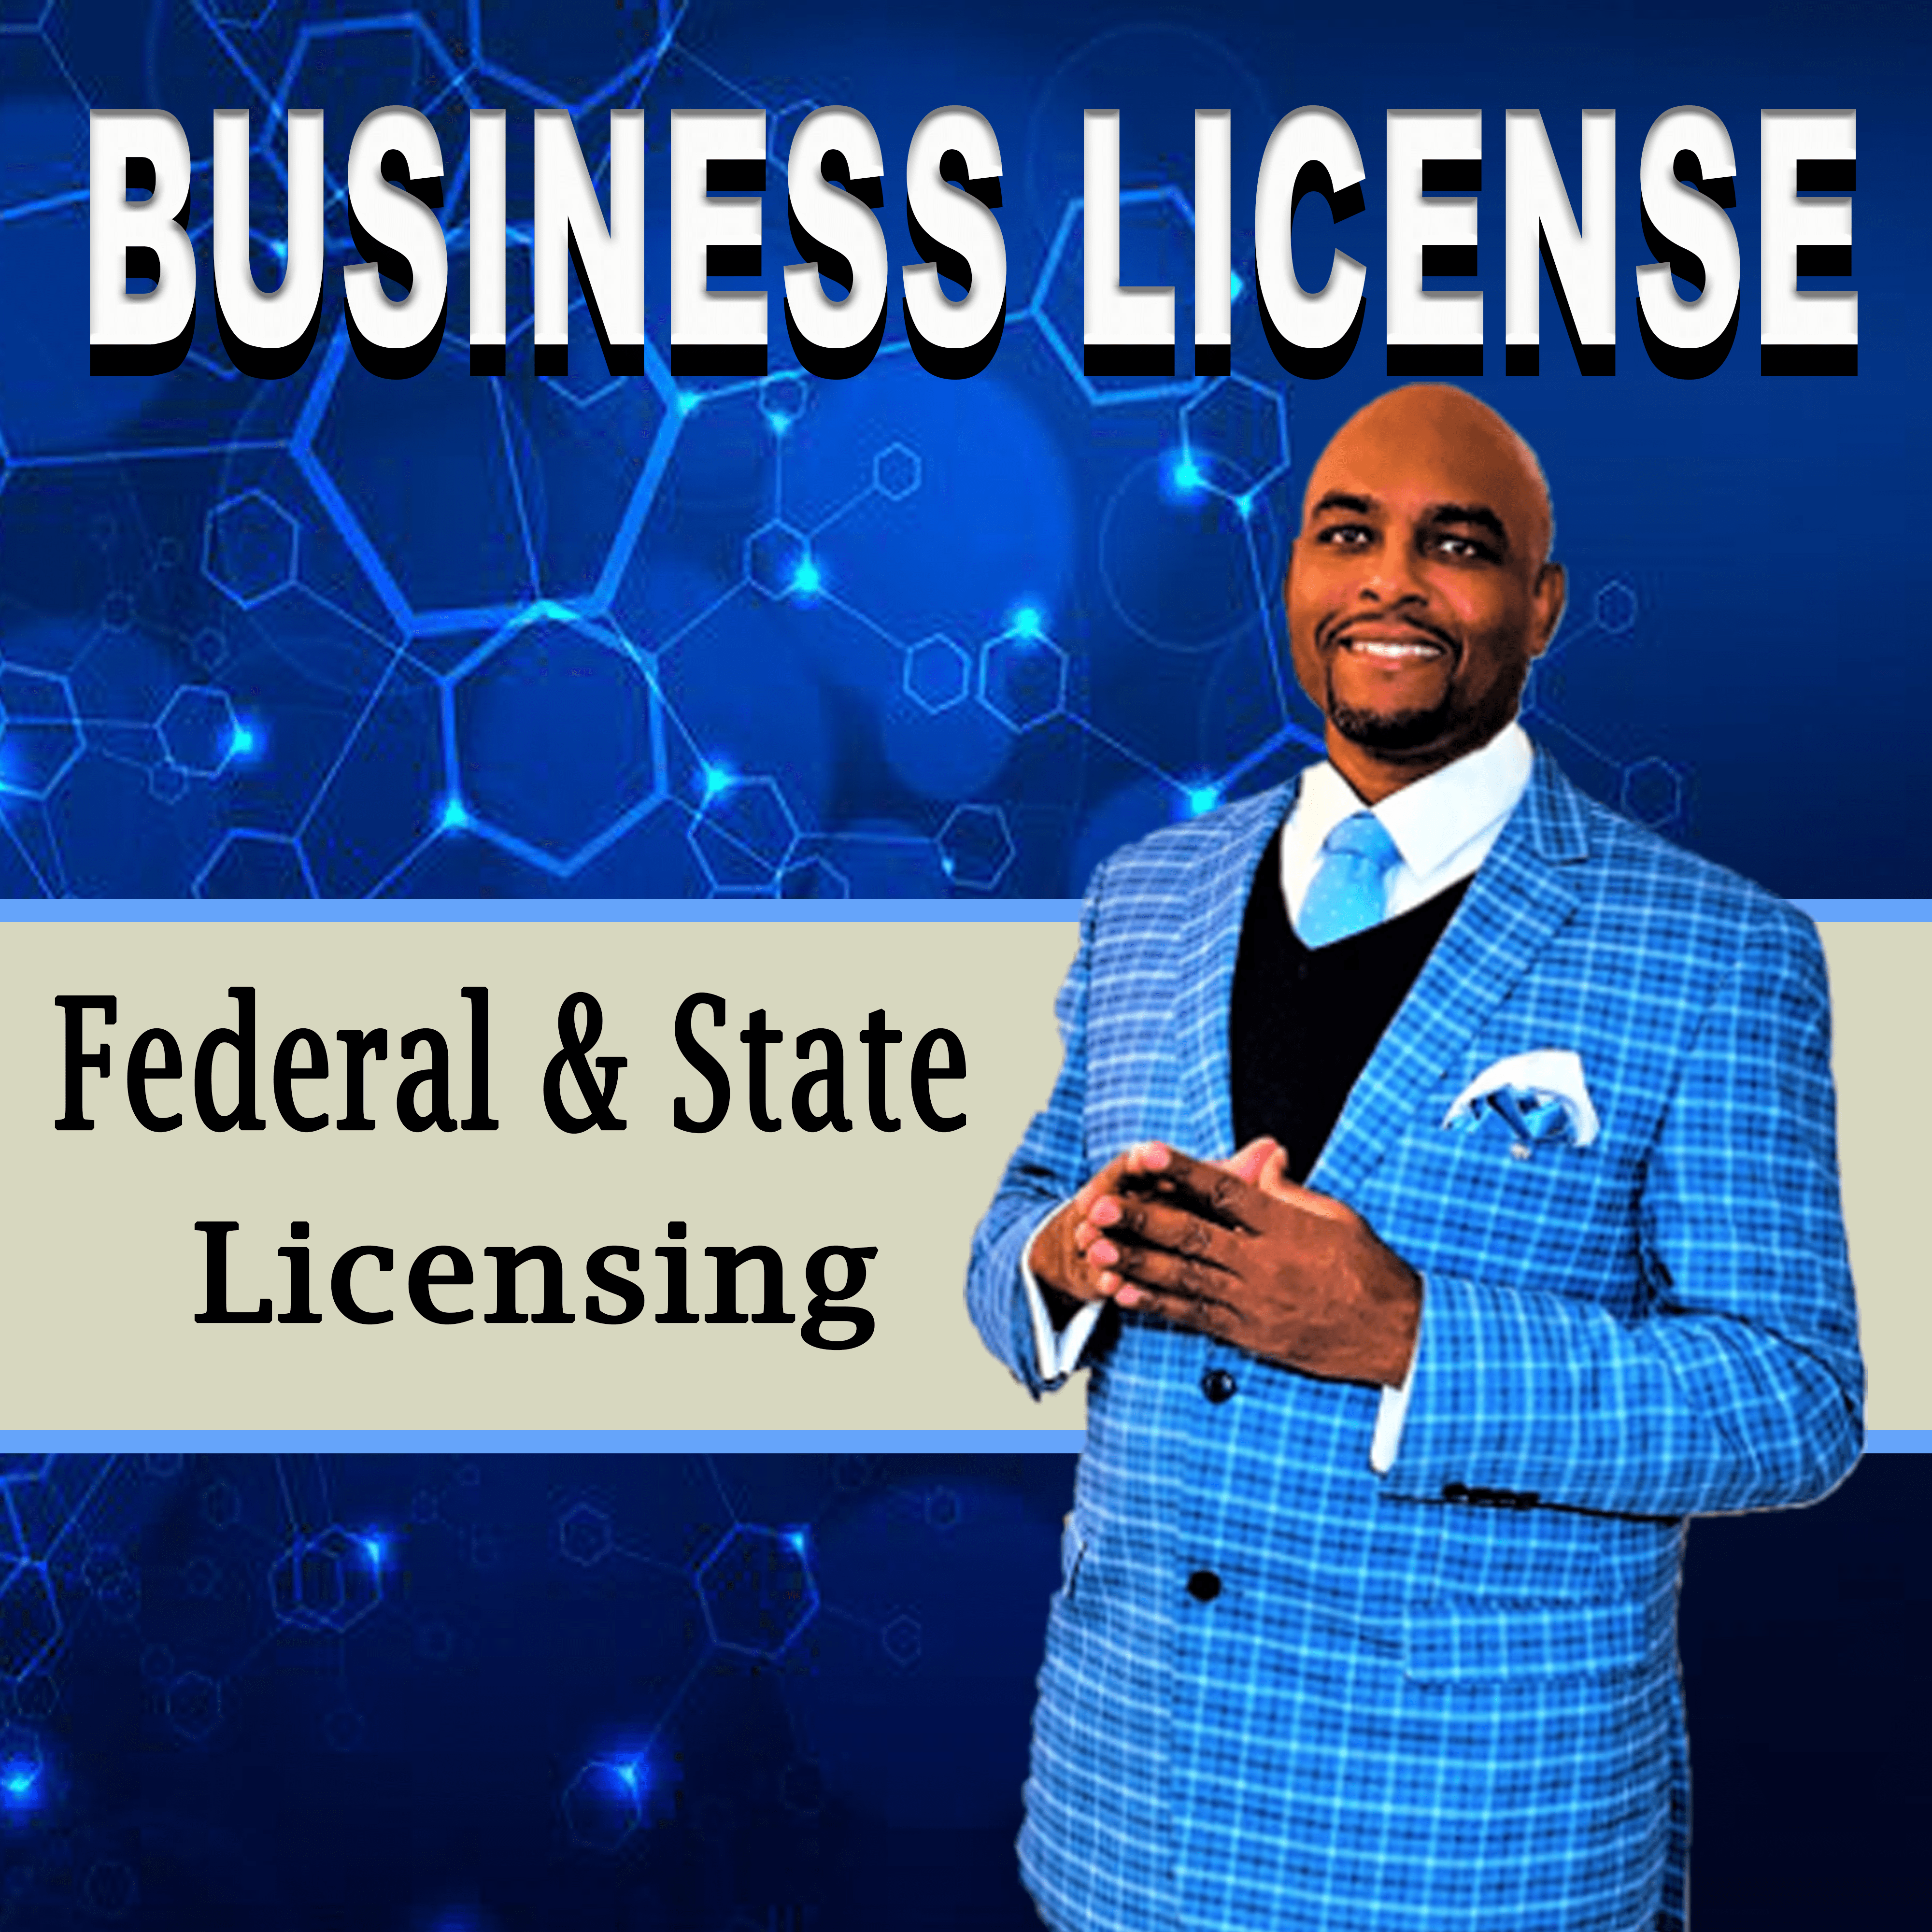 Business licenses are permits issued by governmental agencies that allow individuals or companies to conduct business within its geographical jurisdiction.